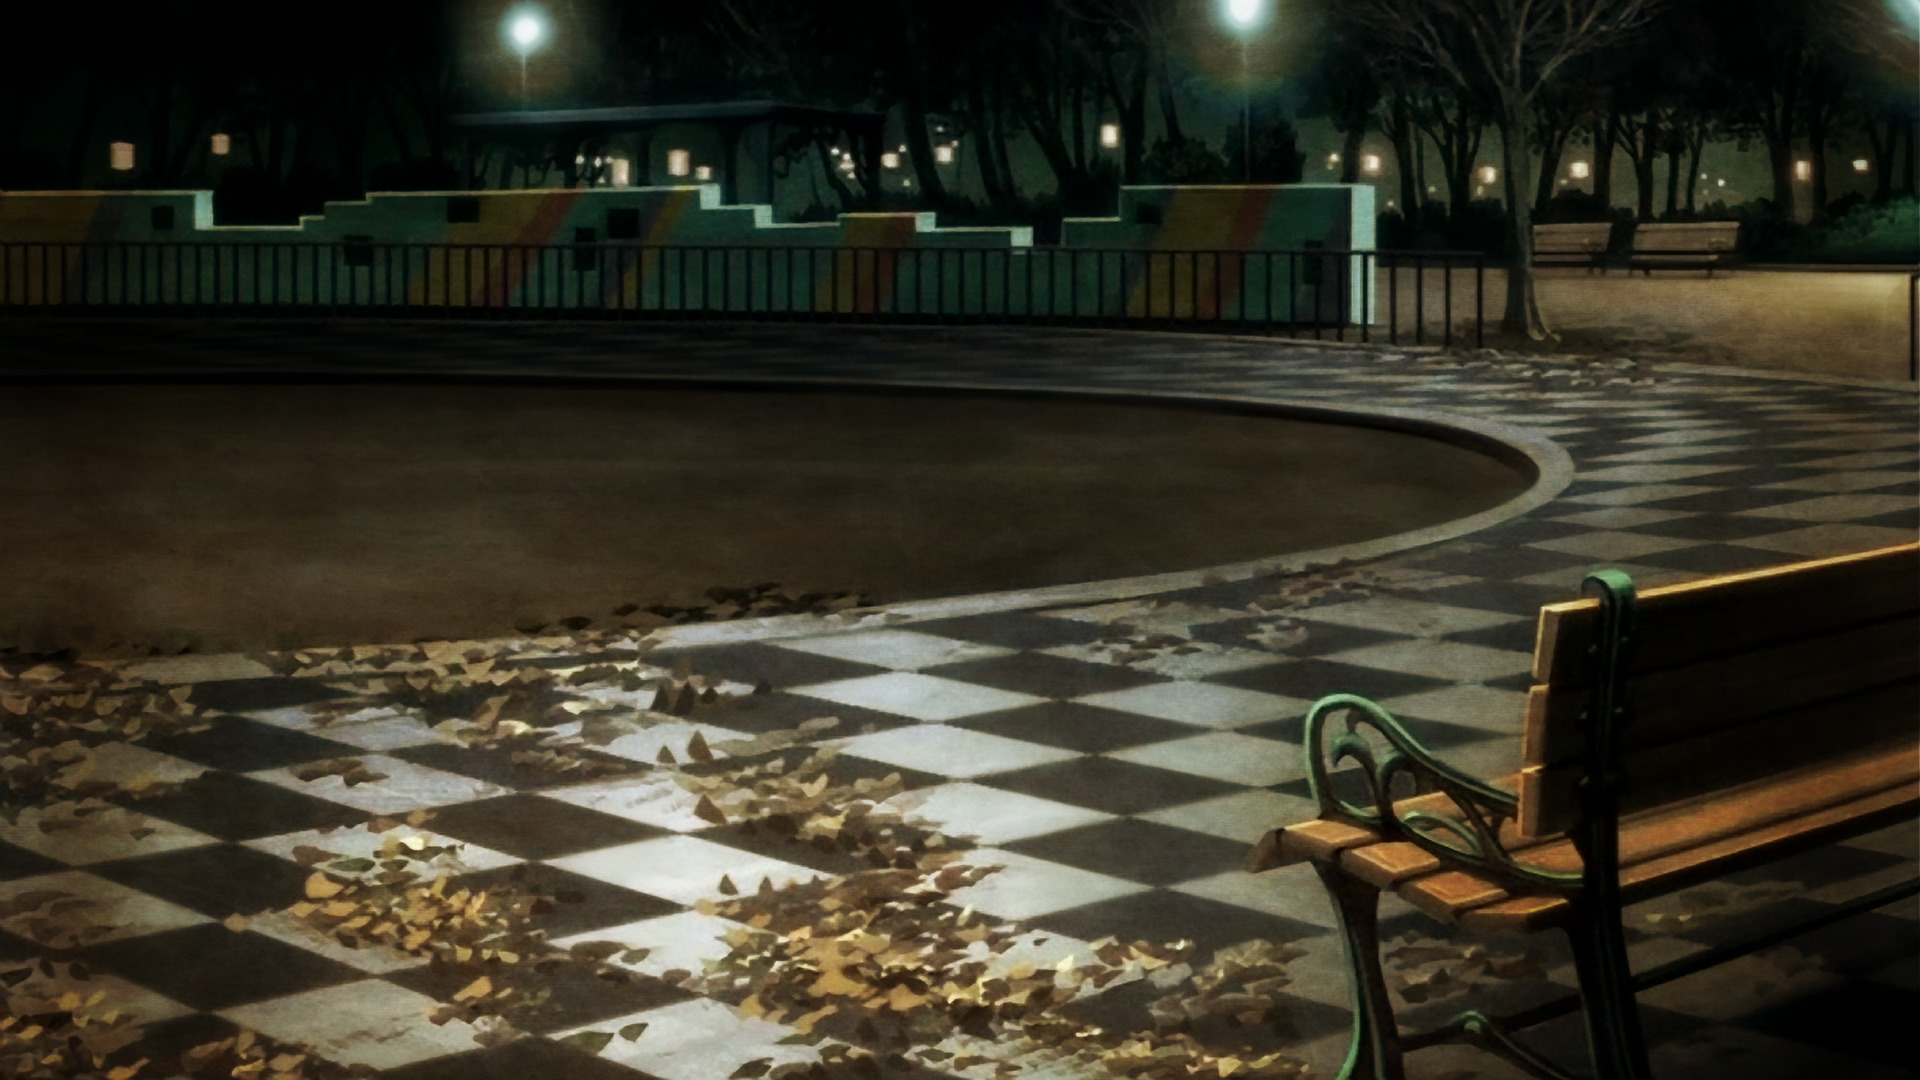 Welcome To The NHK, Park, Loneliness, Fall Wallpaper